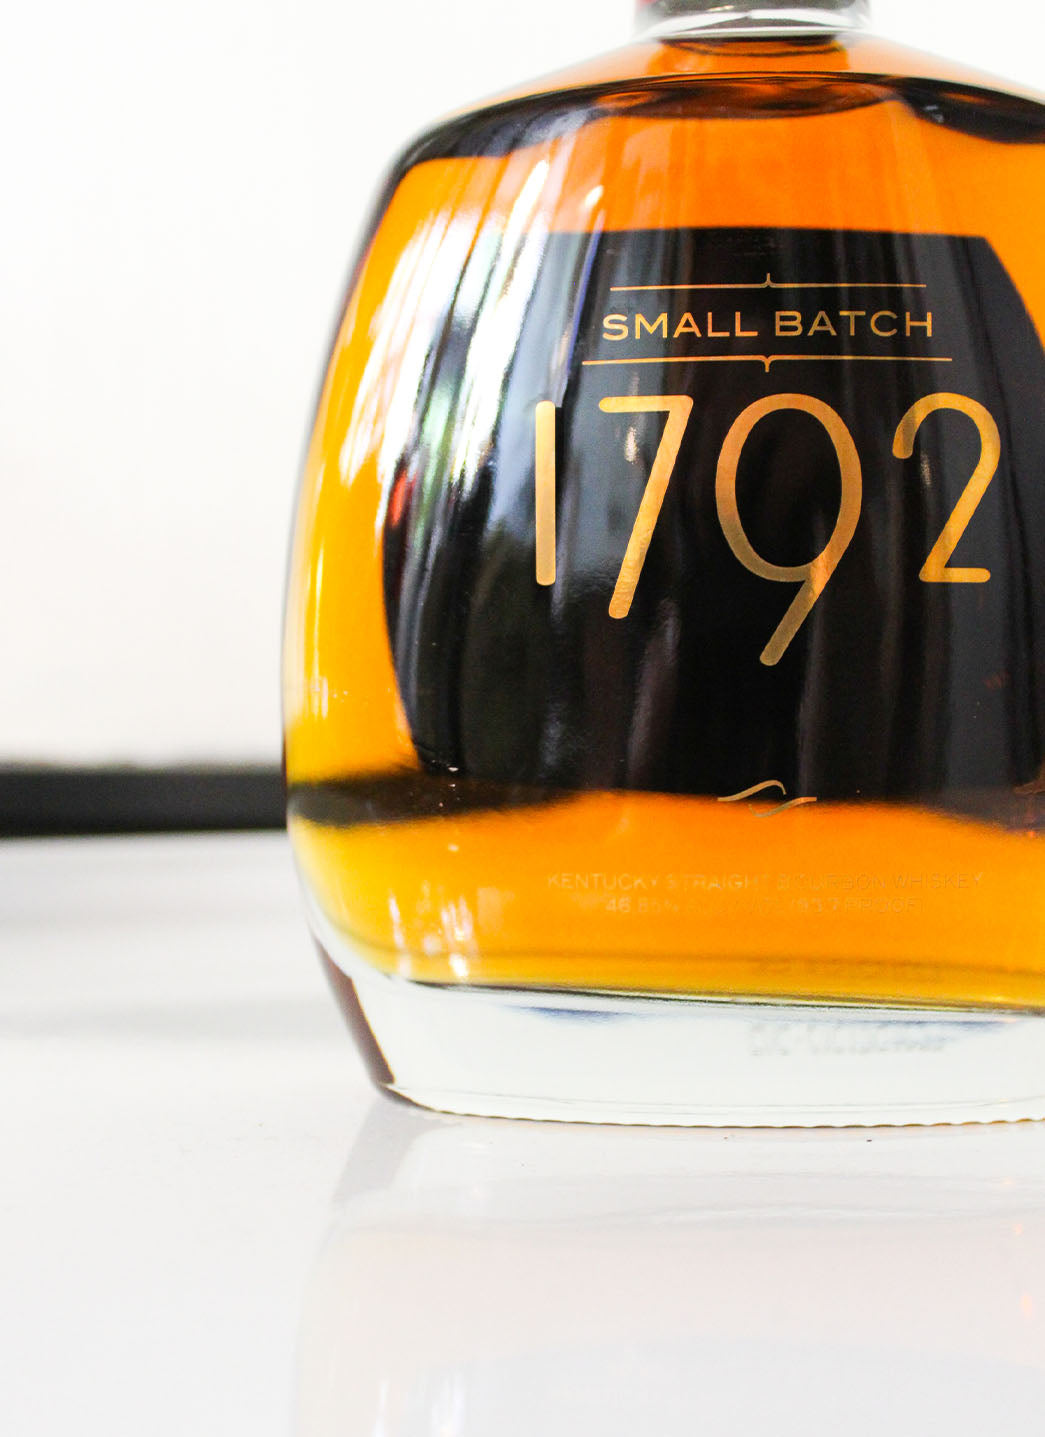 1792 12 Year Old Small Batch Bourbon